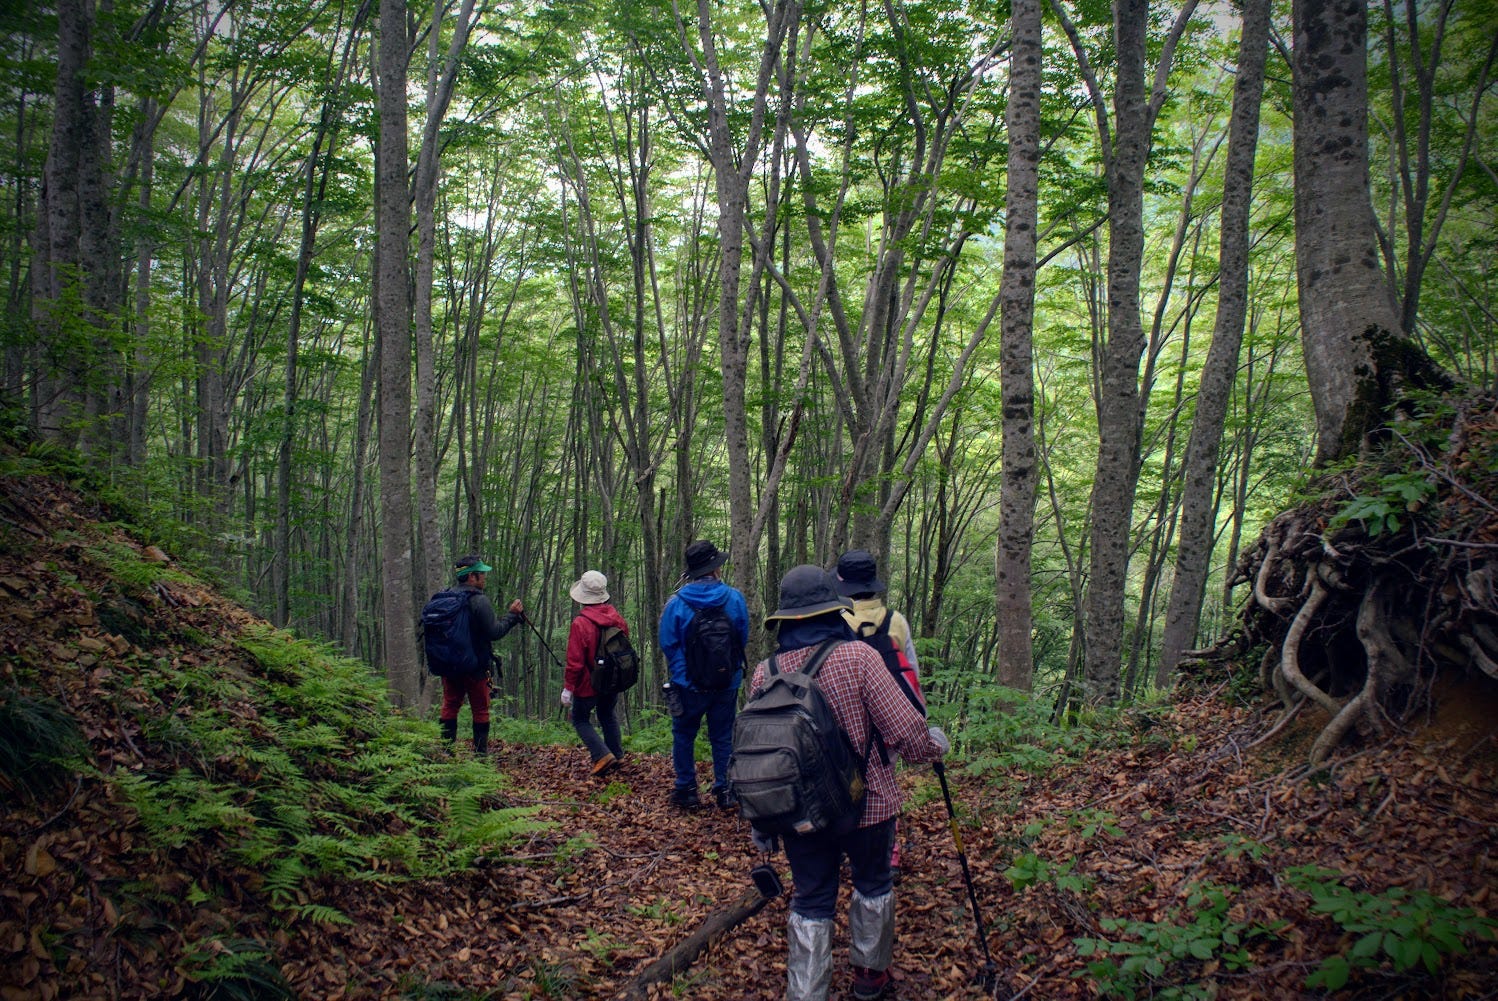 Five hikers walk the trail of Yozo-san surrounded in a beech forest.